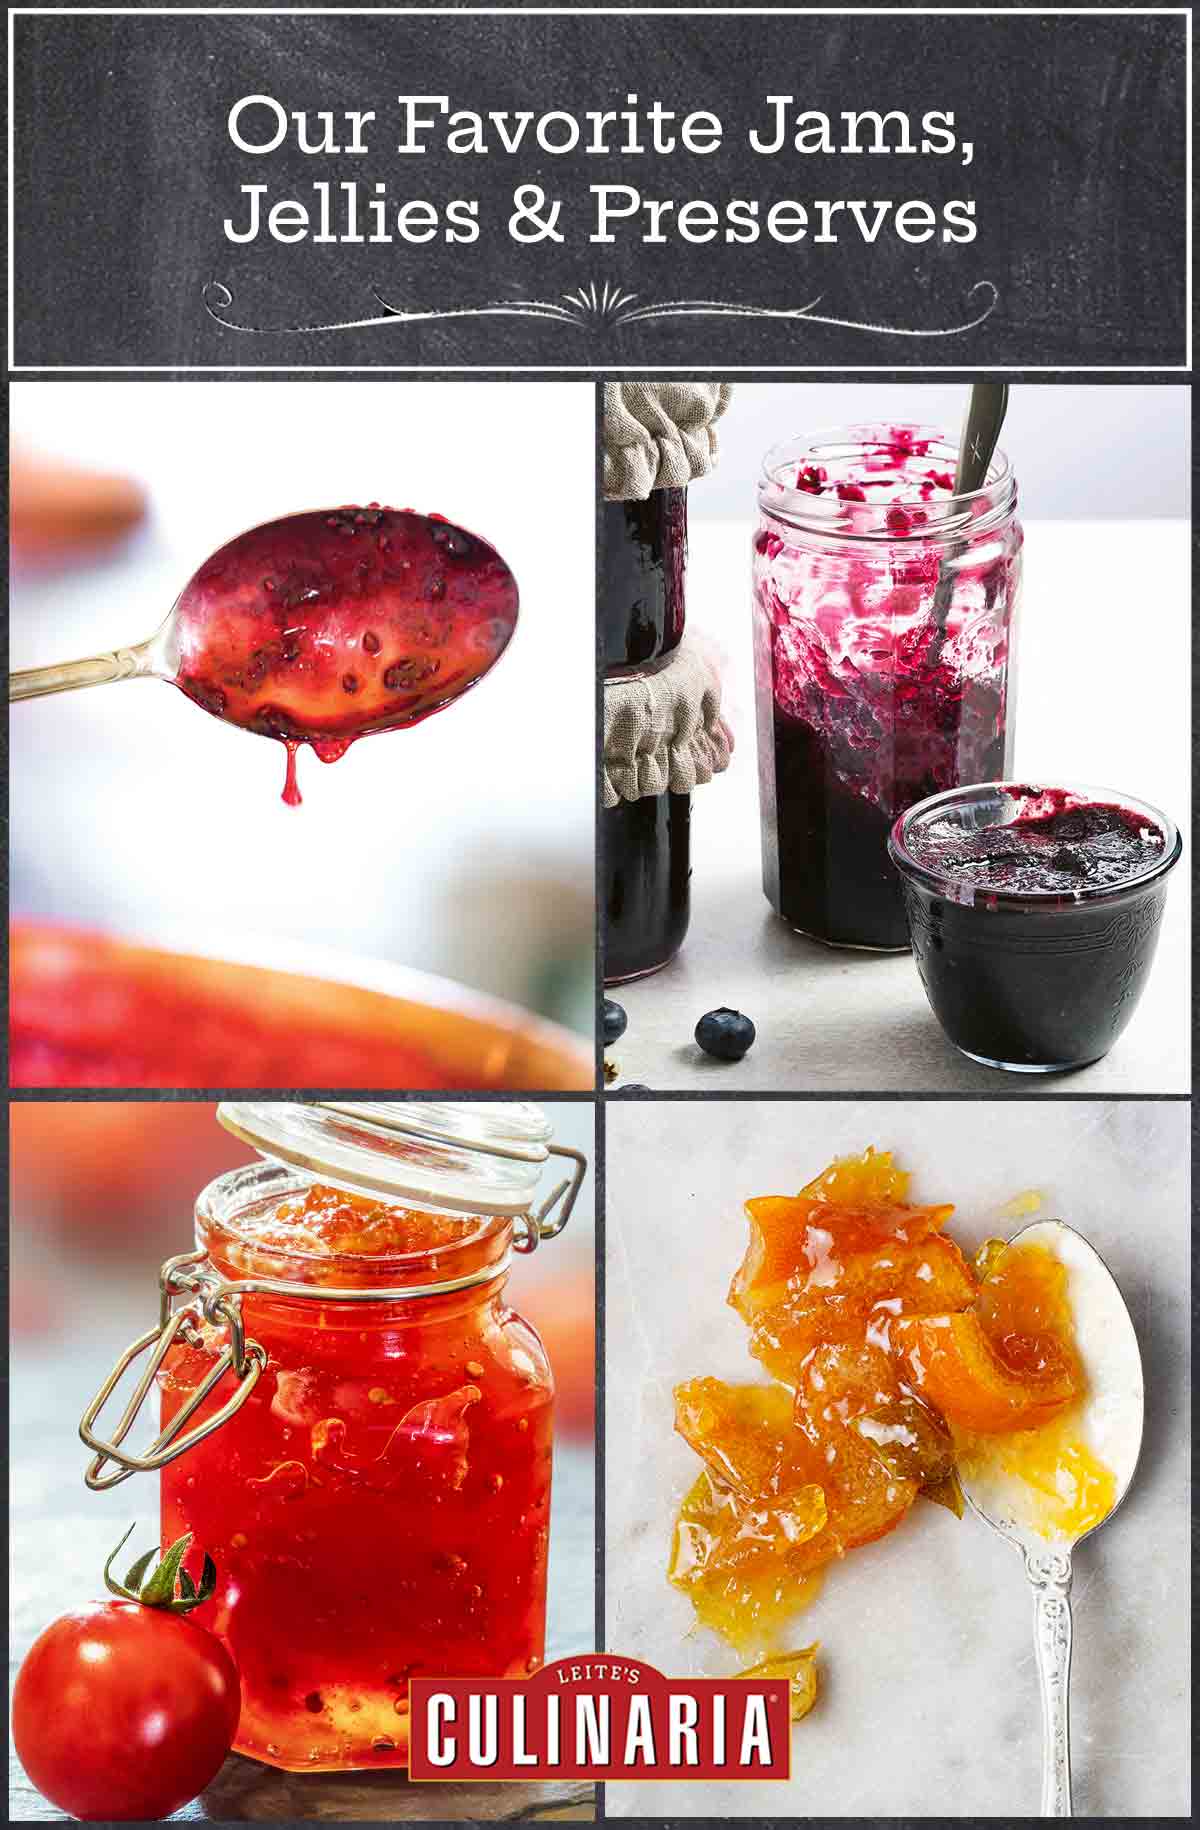 Images of raspberry jam, small batch blueberry jam, tomato jelly, and citrus marmalade.